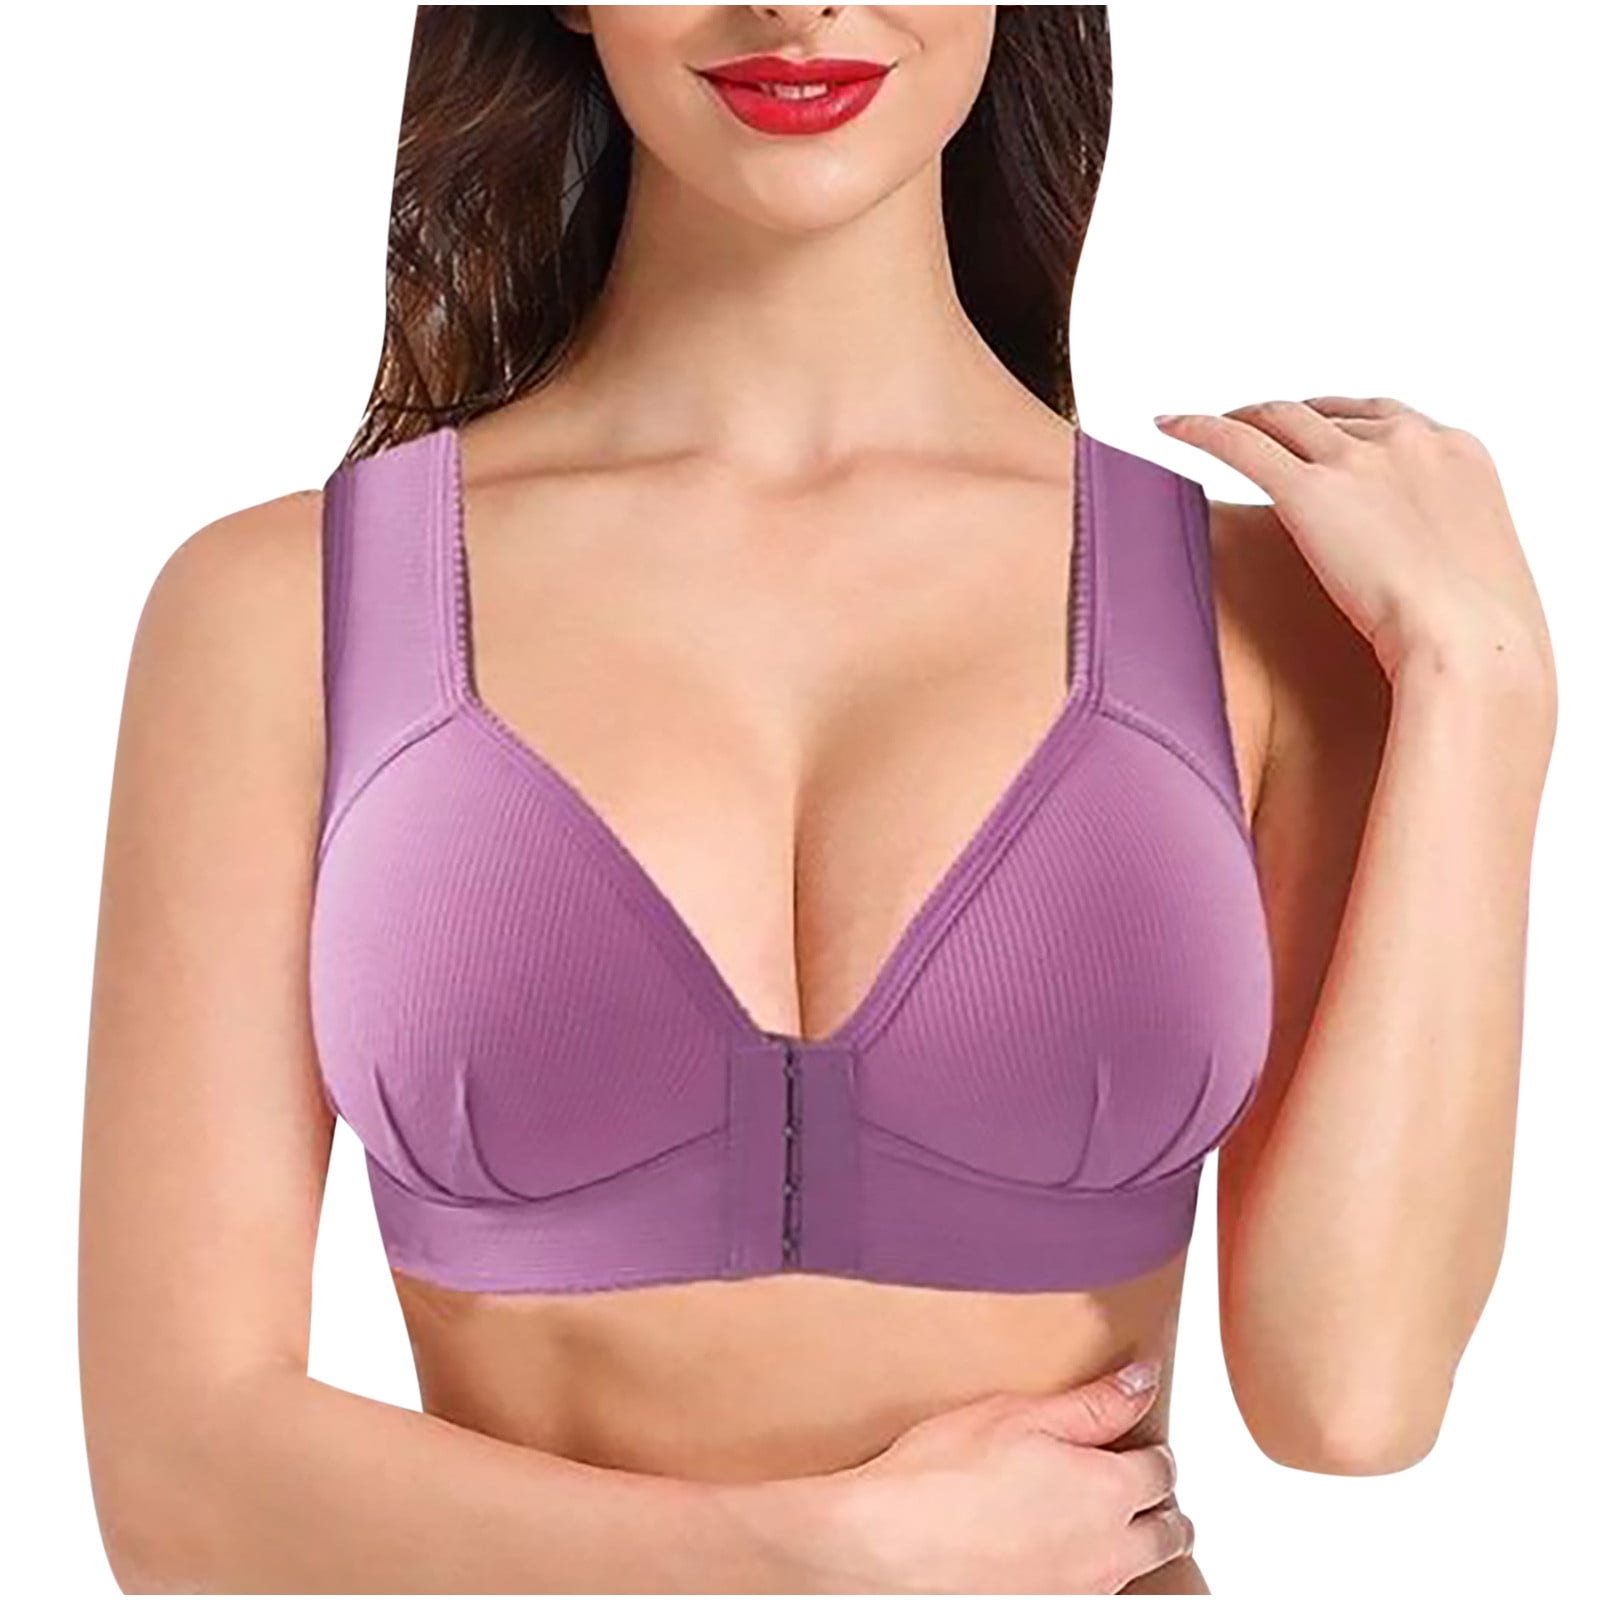 Ultra Thin Lace Sheer Wireless Minimizer Best Plus Size Bras For Women Full  Coverage, Plus Size Options 36 50 B D, E From Dou05, $9.27